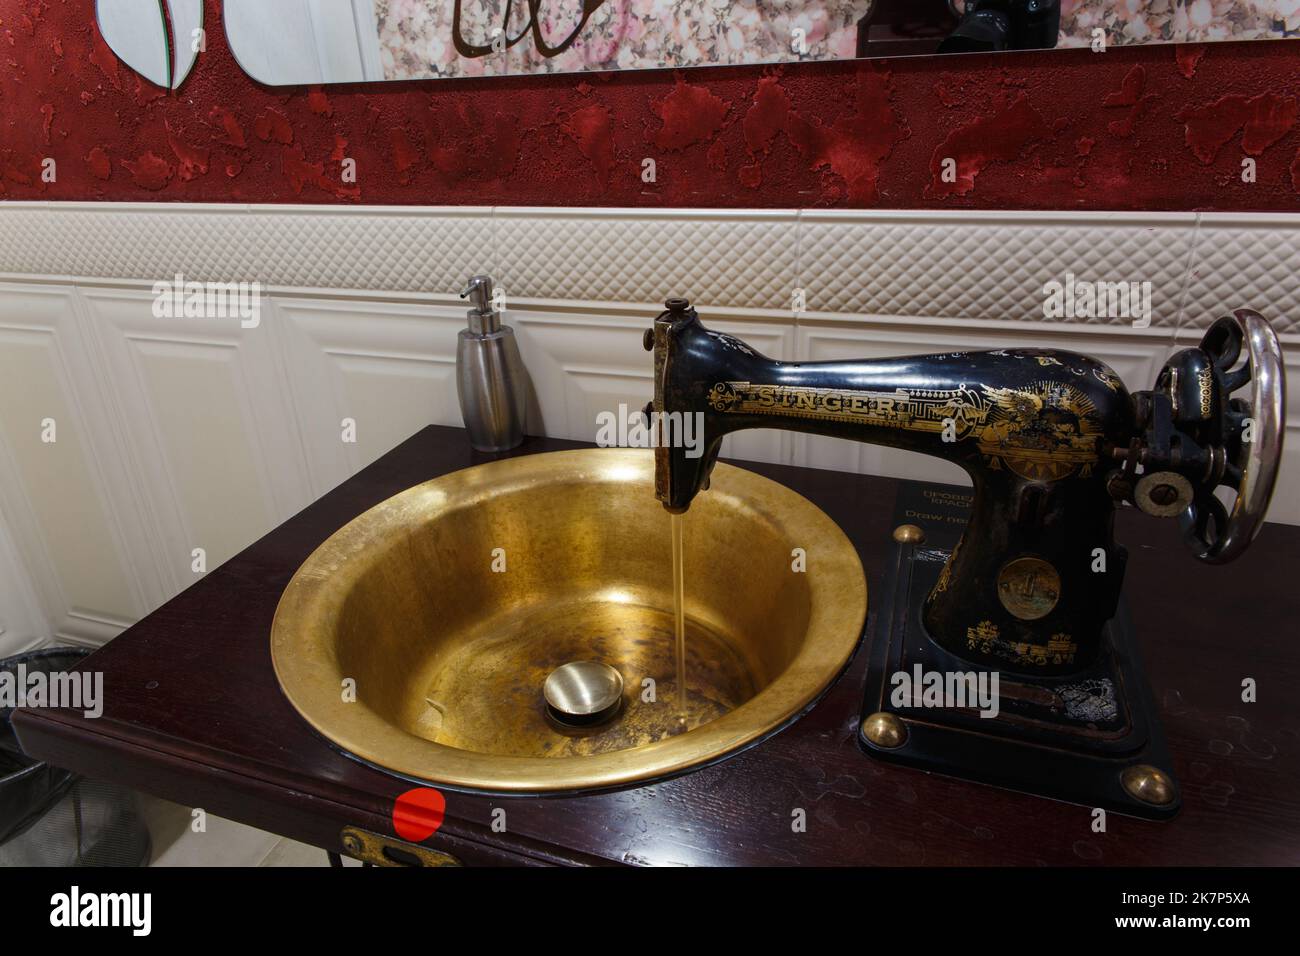 Grodno, Belarus - October 13, 2017: A washbasin made from an old Singer sewing machine in the Faraday bar. The water turns on automatically when the h Stock Photo